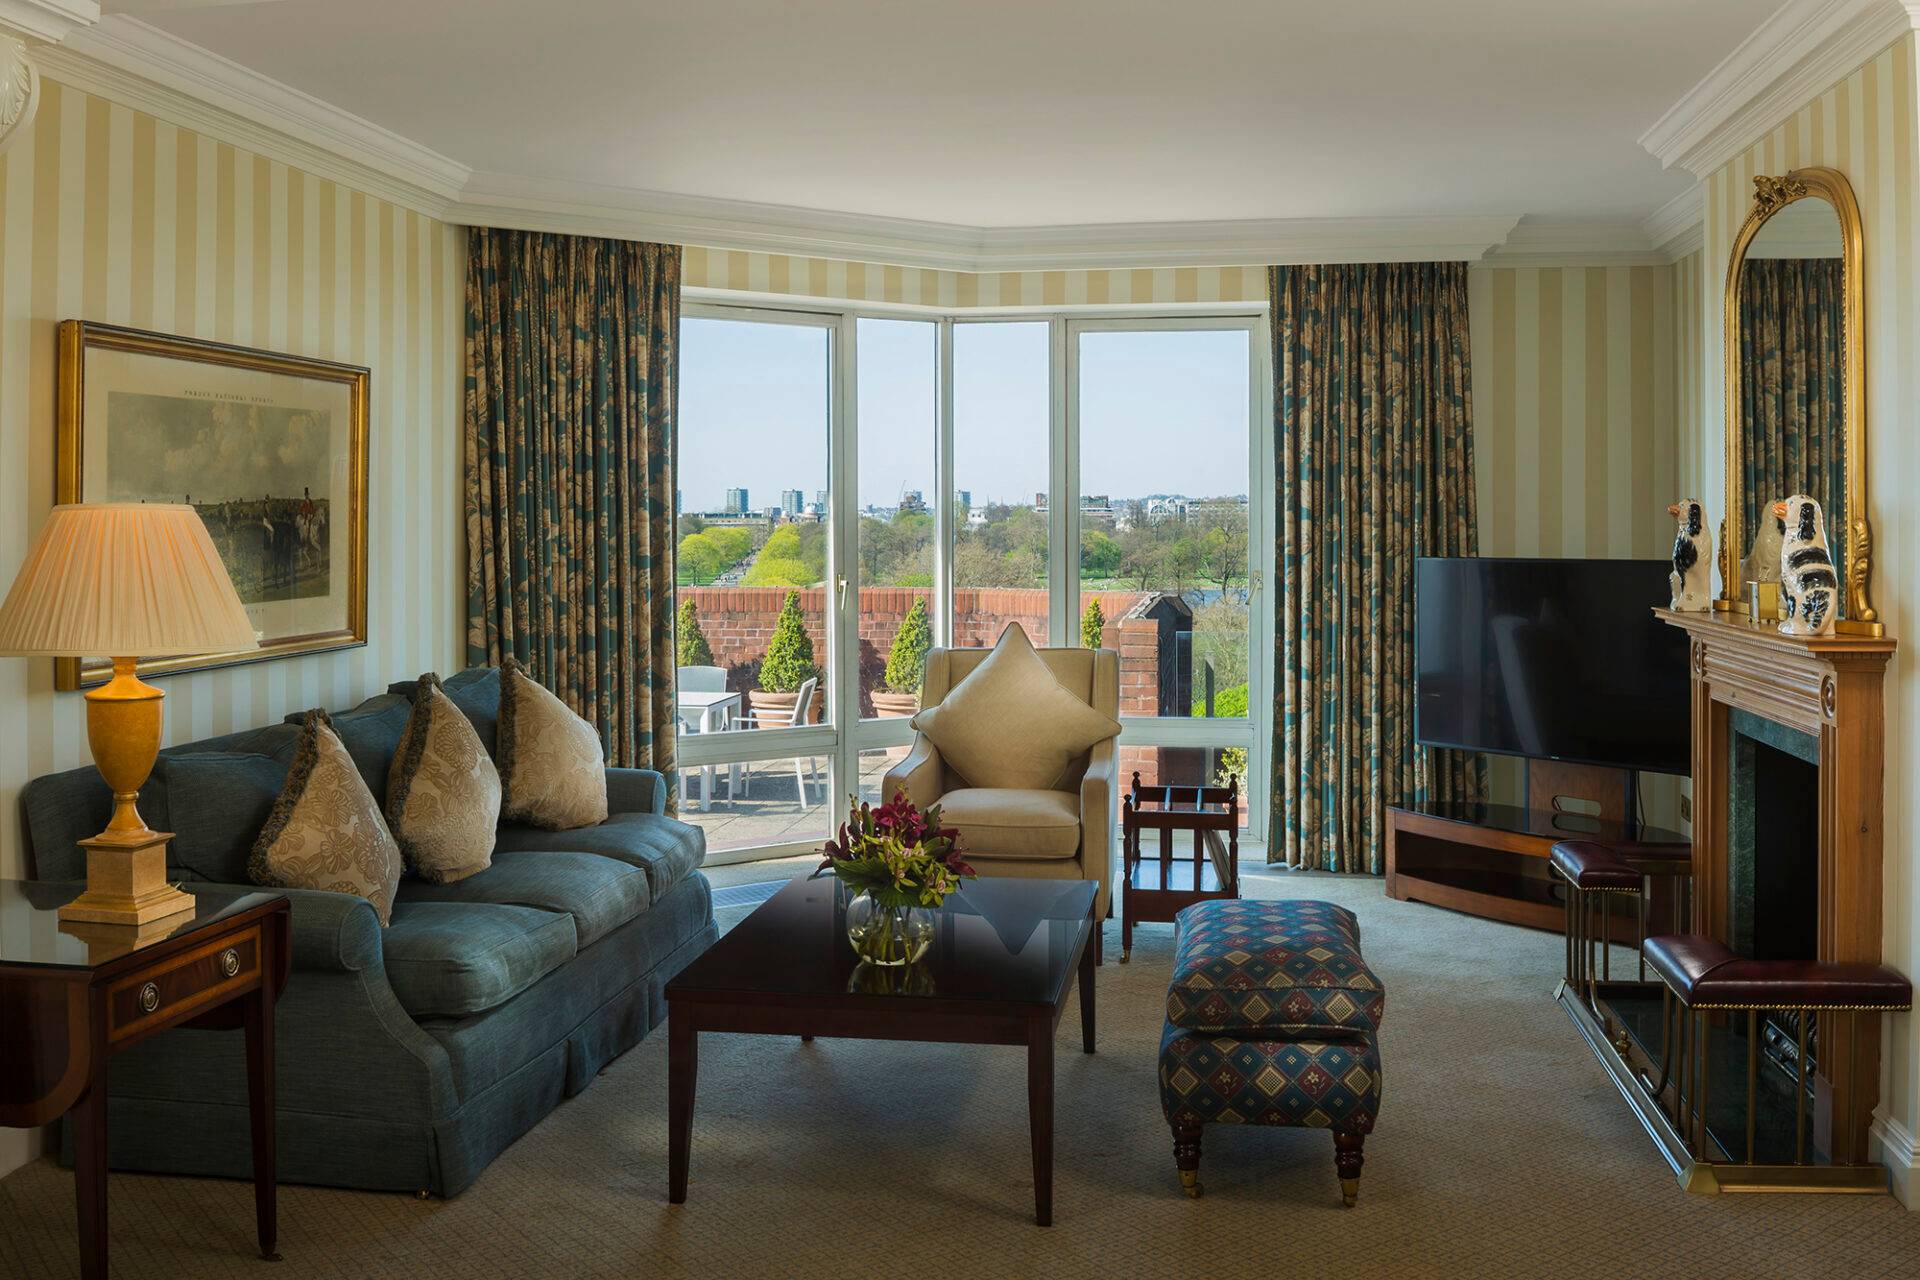 Two-Bedroom Penthouse Serviced Apartment in prestigious Kensington Gardens with Panoramic Hyde Park Views